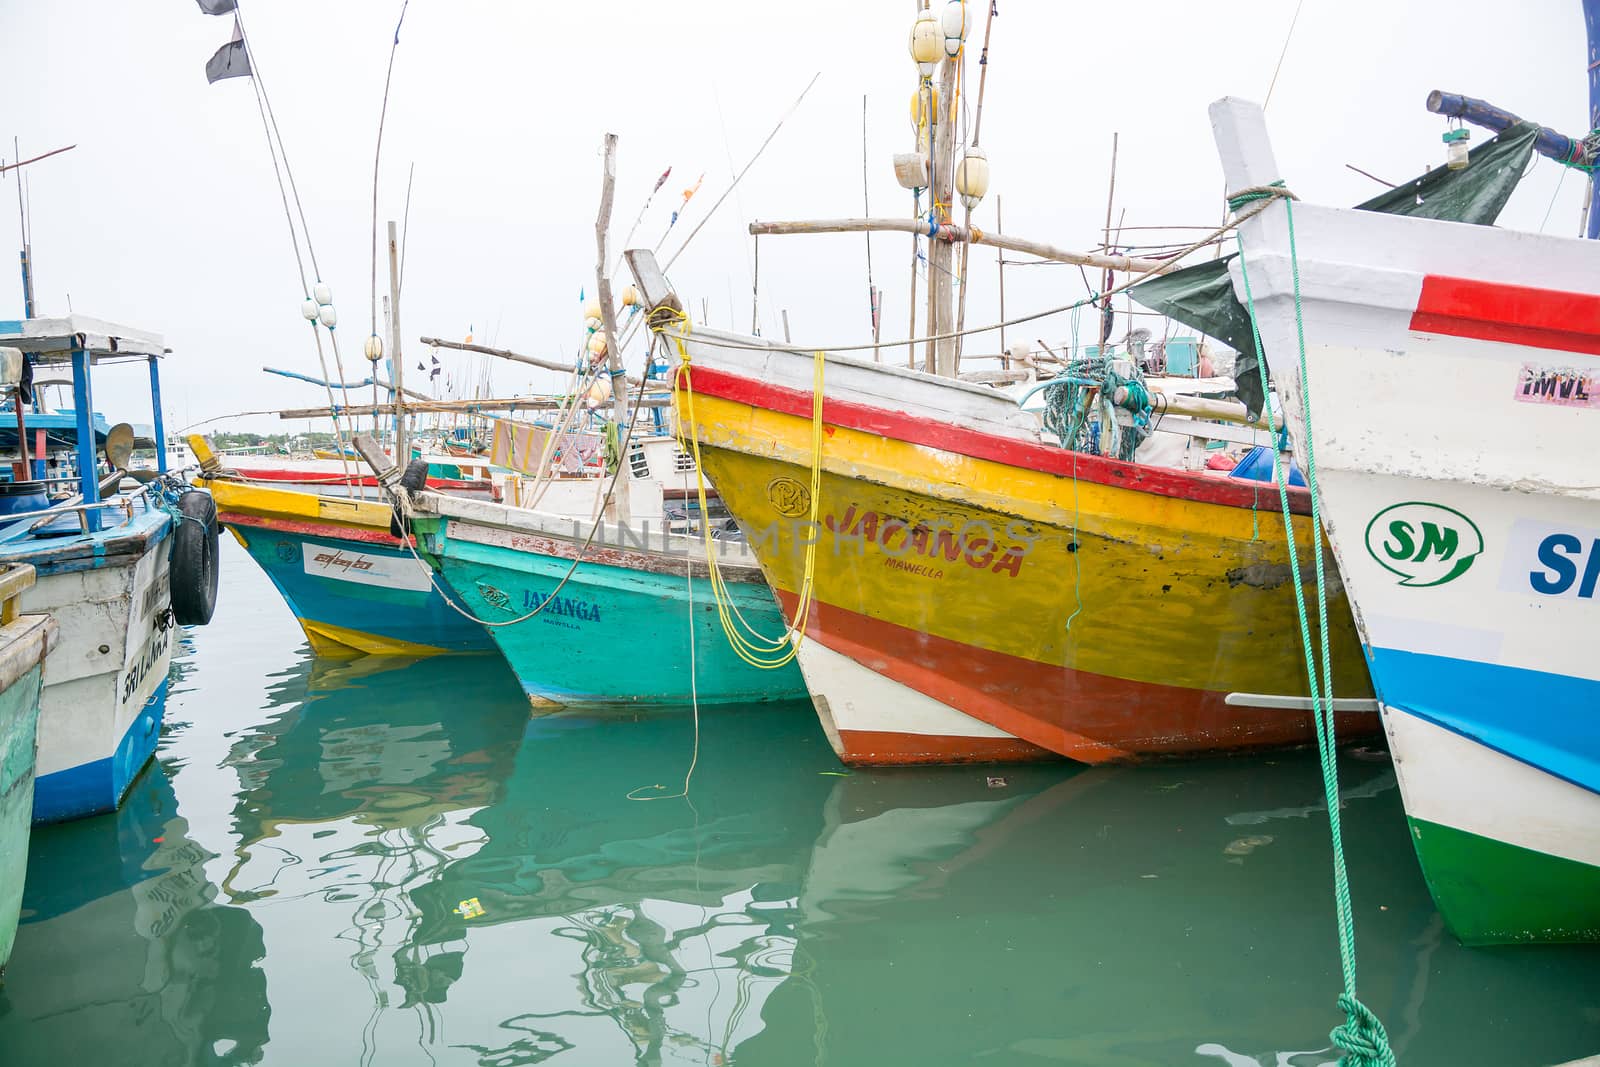 TANGALLE, SOUTHERN PROVINCE, SRI LANKA, ASIA - DECEMBER 20, 2014: Colorful wood fishing boats moored on December 20, 2014 in Tangalle port, Southern Province, Sri Lanka.